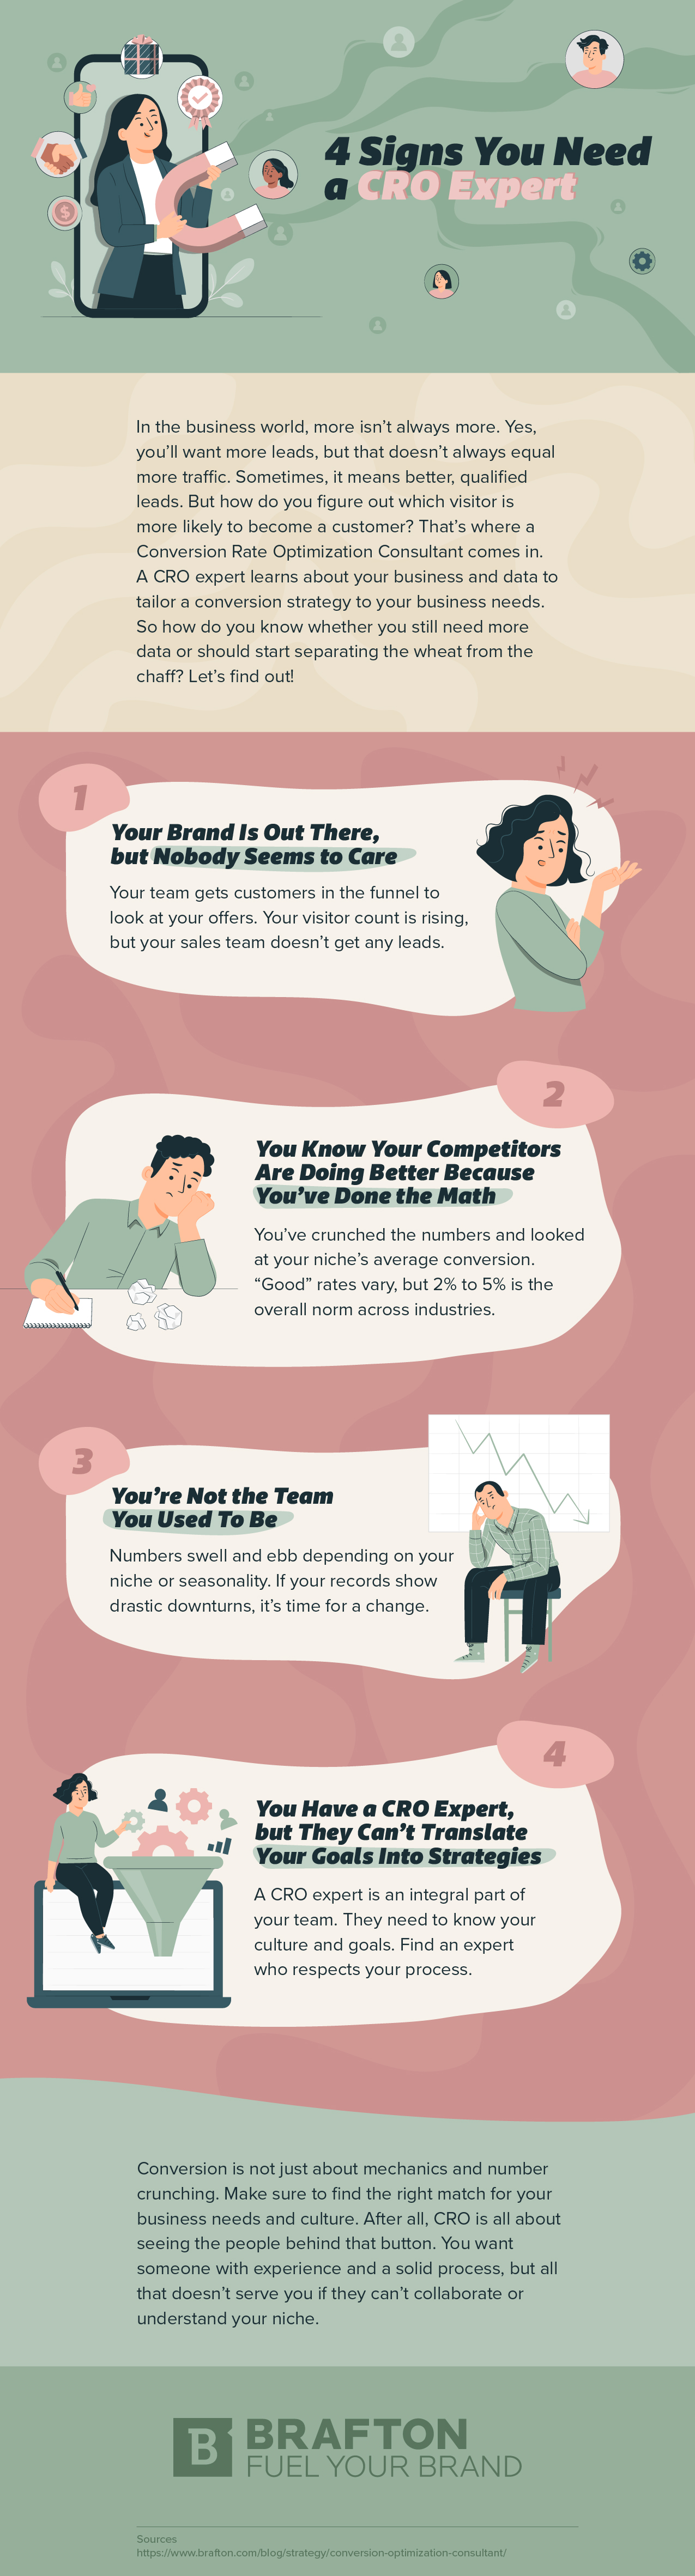 4 signs you need a CRO expert infographic